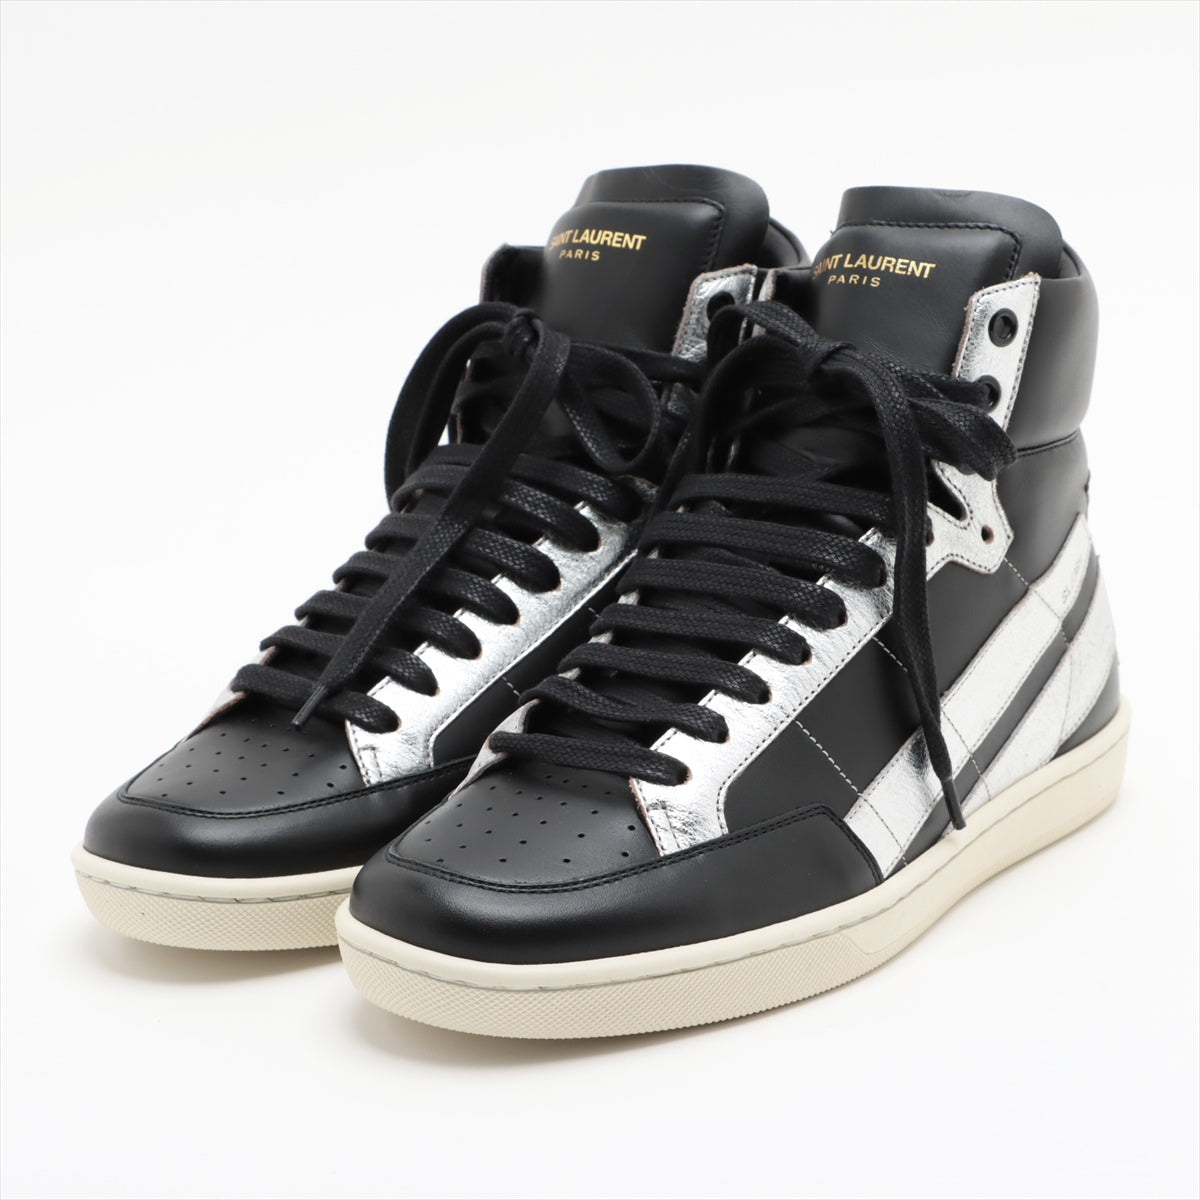 Saint Laurent Paris Leather High-top Sneakers 39 Men's Black 418044 Is there a replacement string